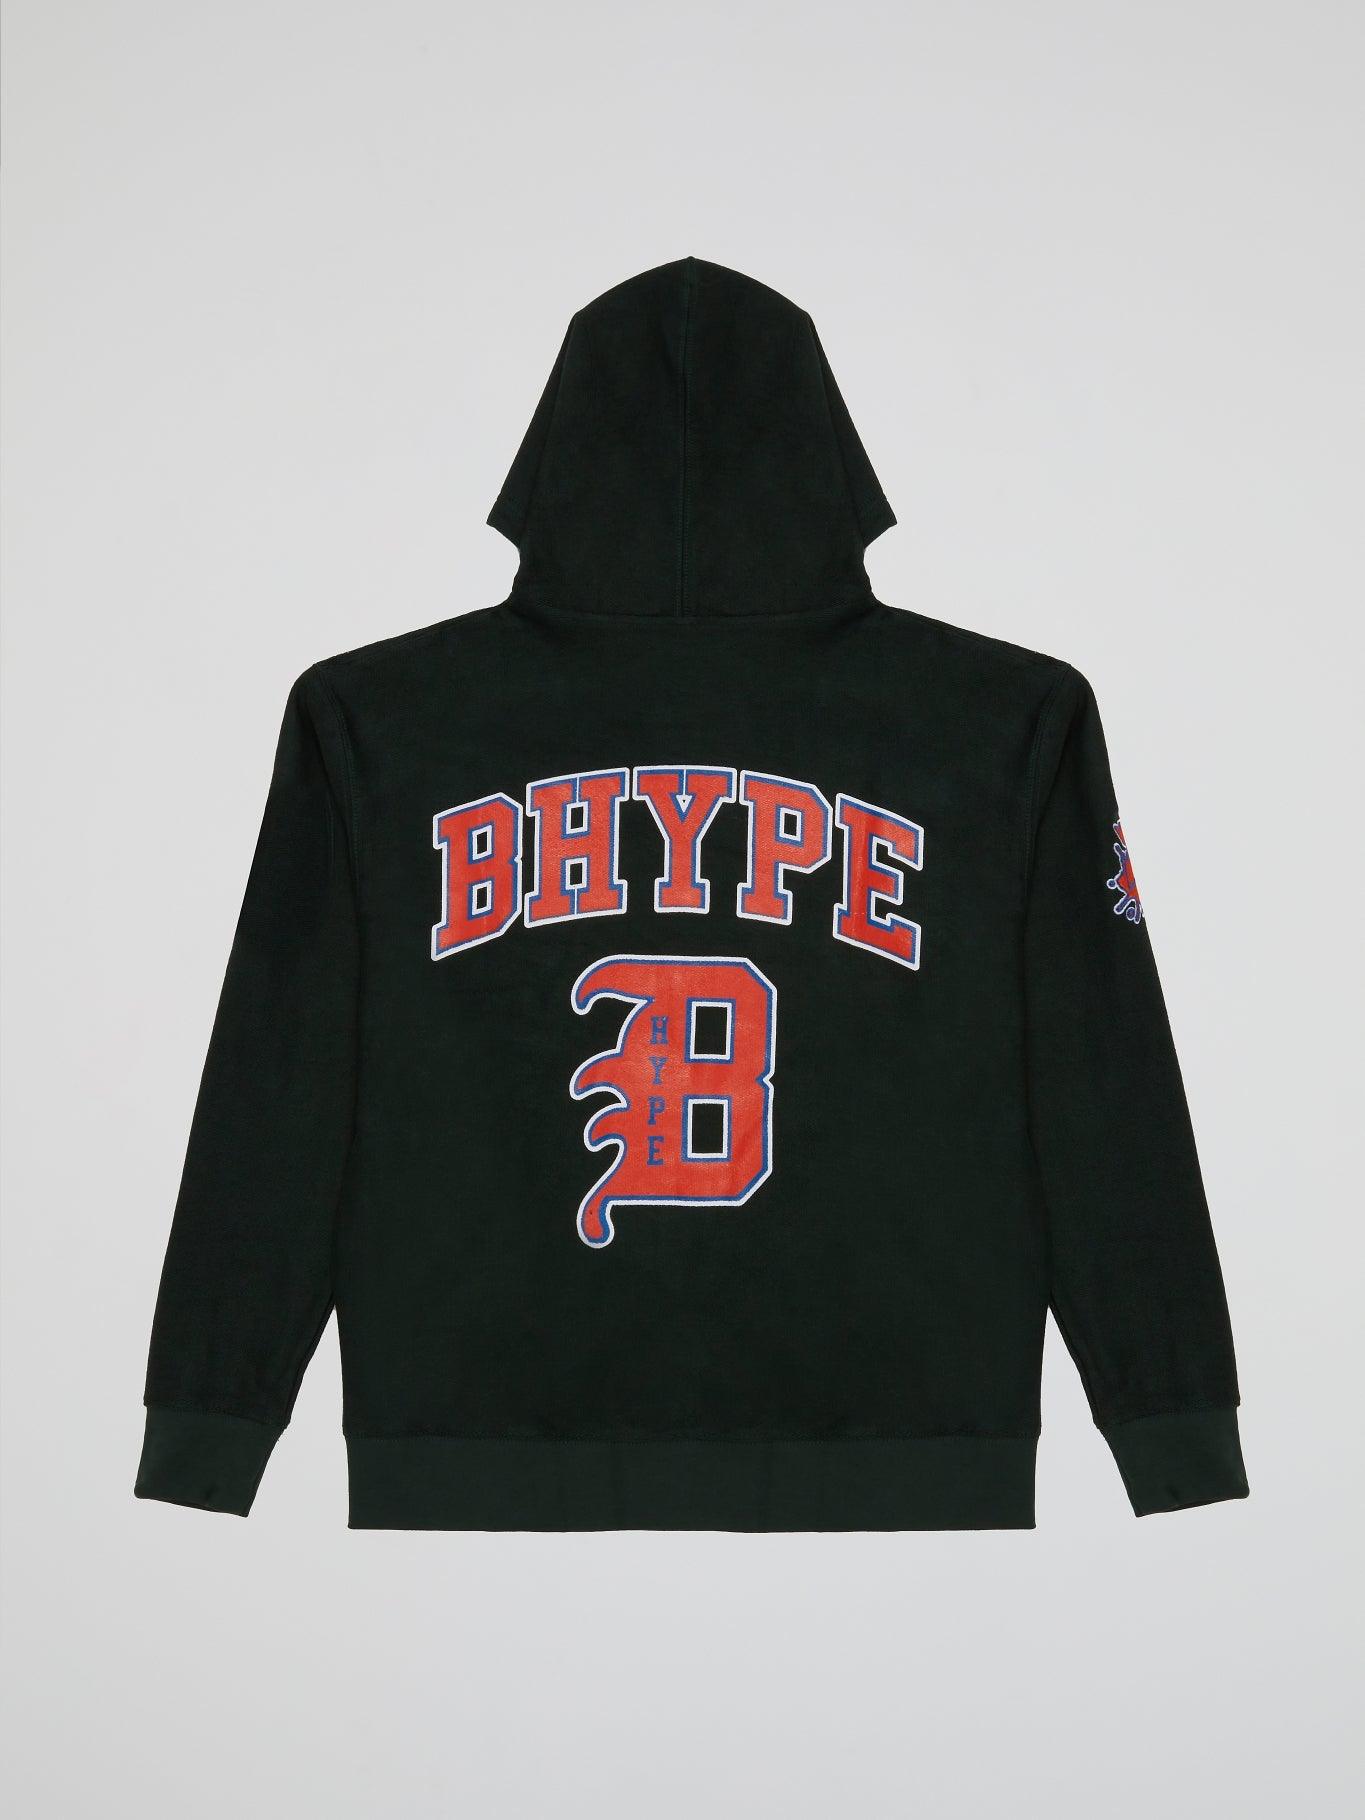 BHYPE VARSITY COLLECTION HOODIE GREEN - B-Hype Society